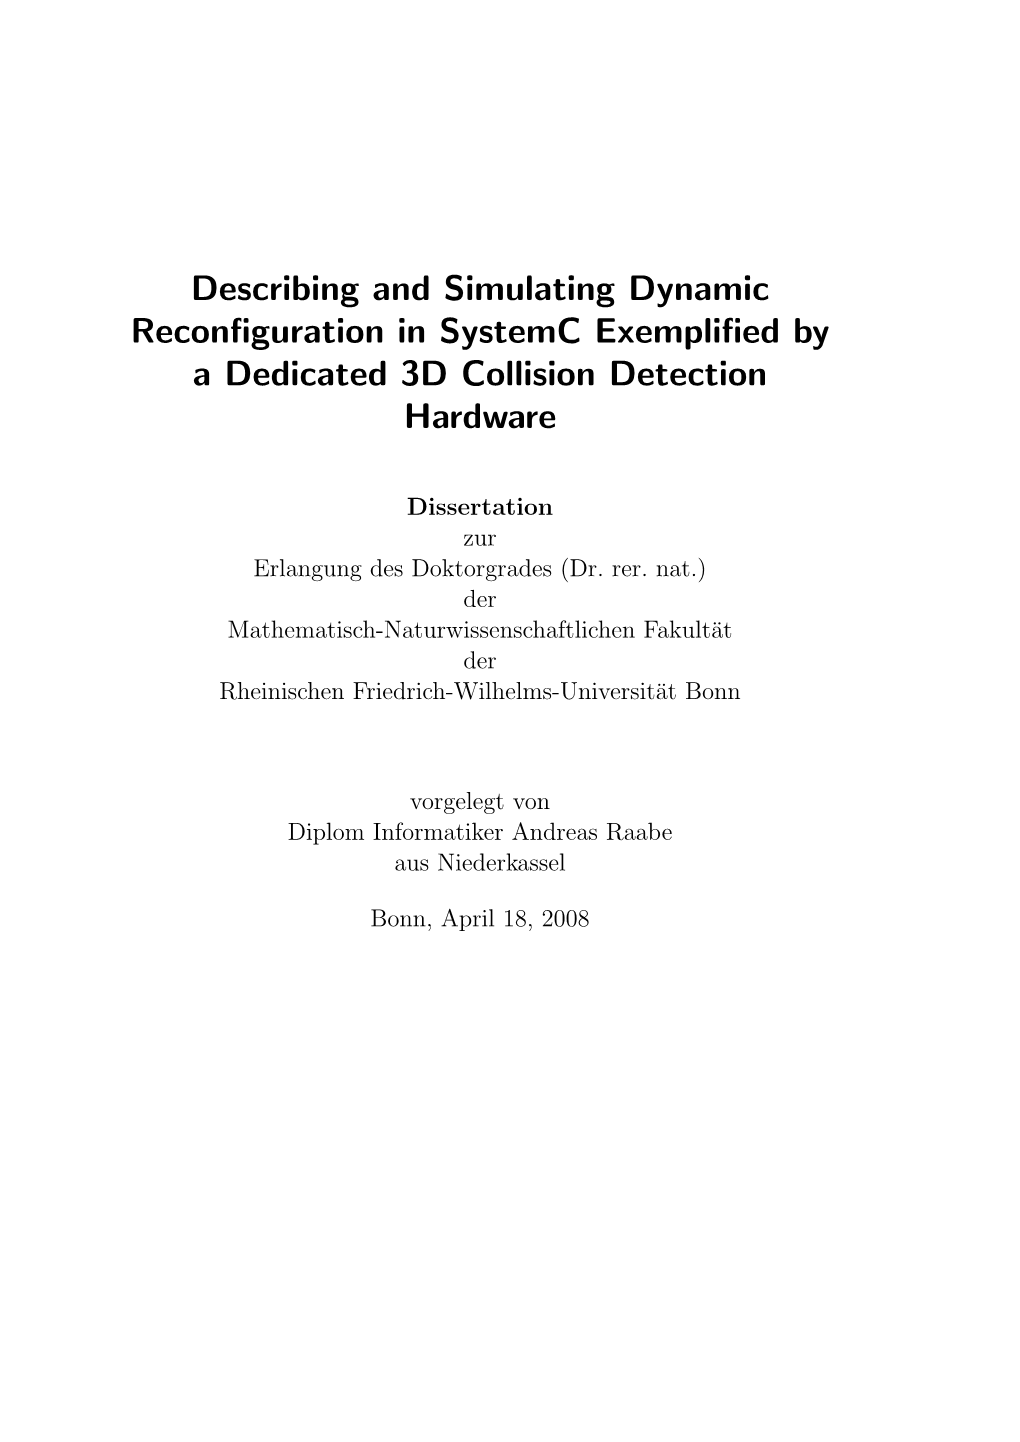 Describing and Simulating Dynamic Reconfiguration in Systemc